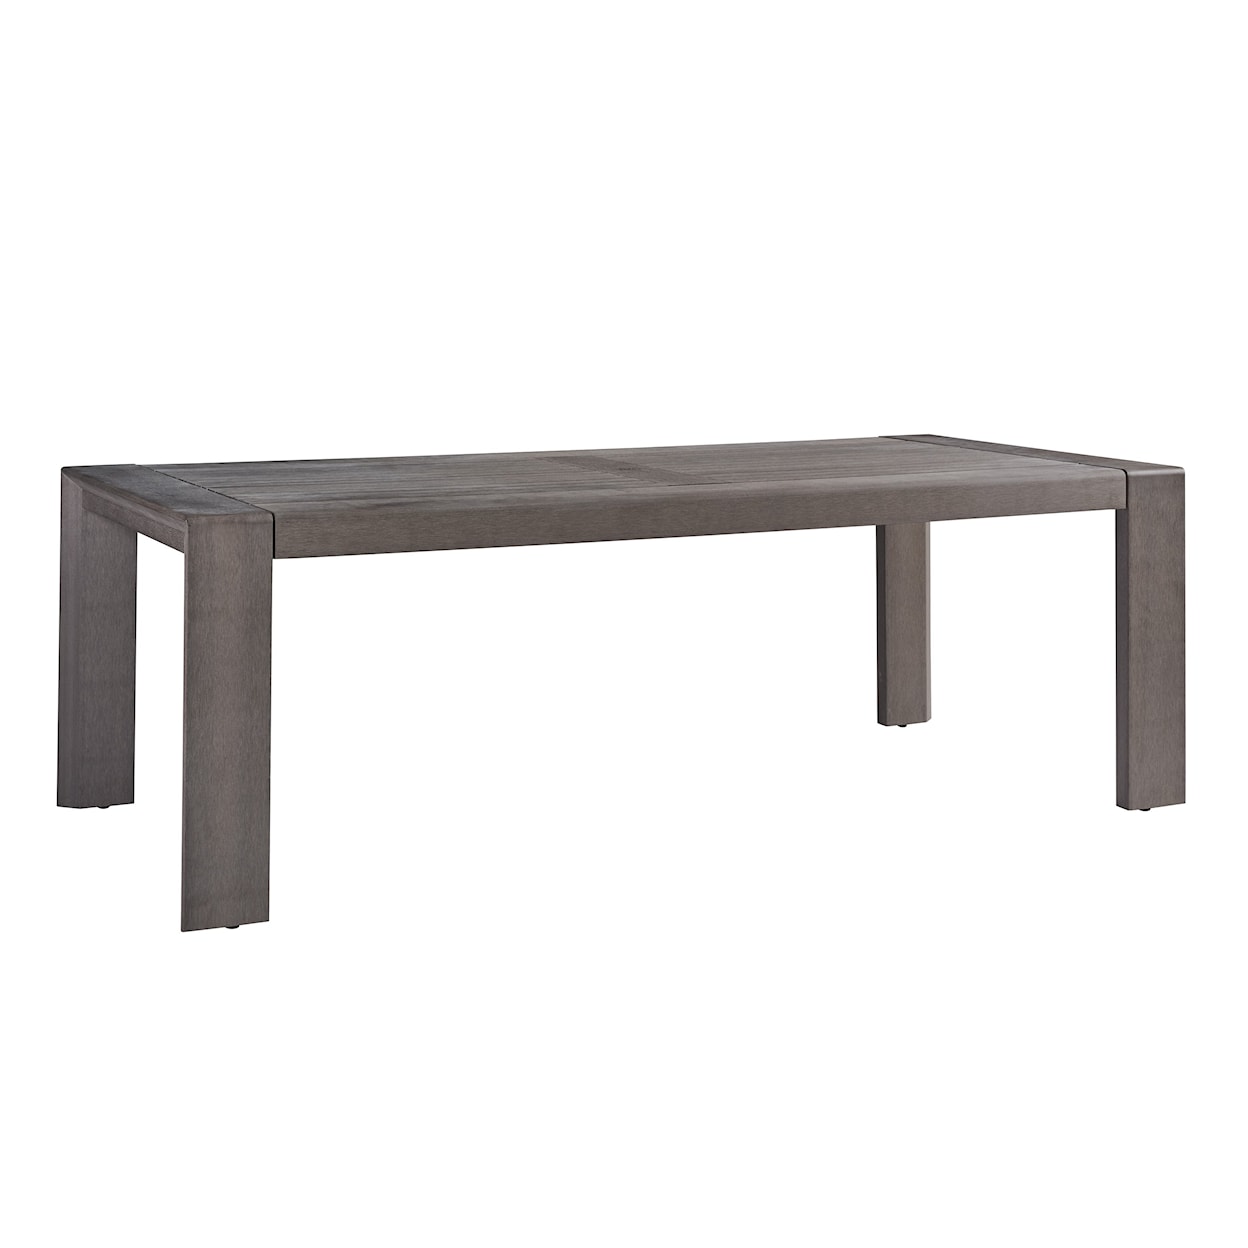 Tommy Bahama Outdoor Living Mozambique Rectangular Dining Table